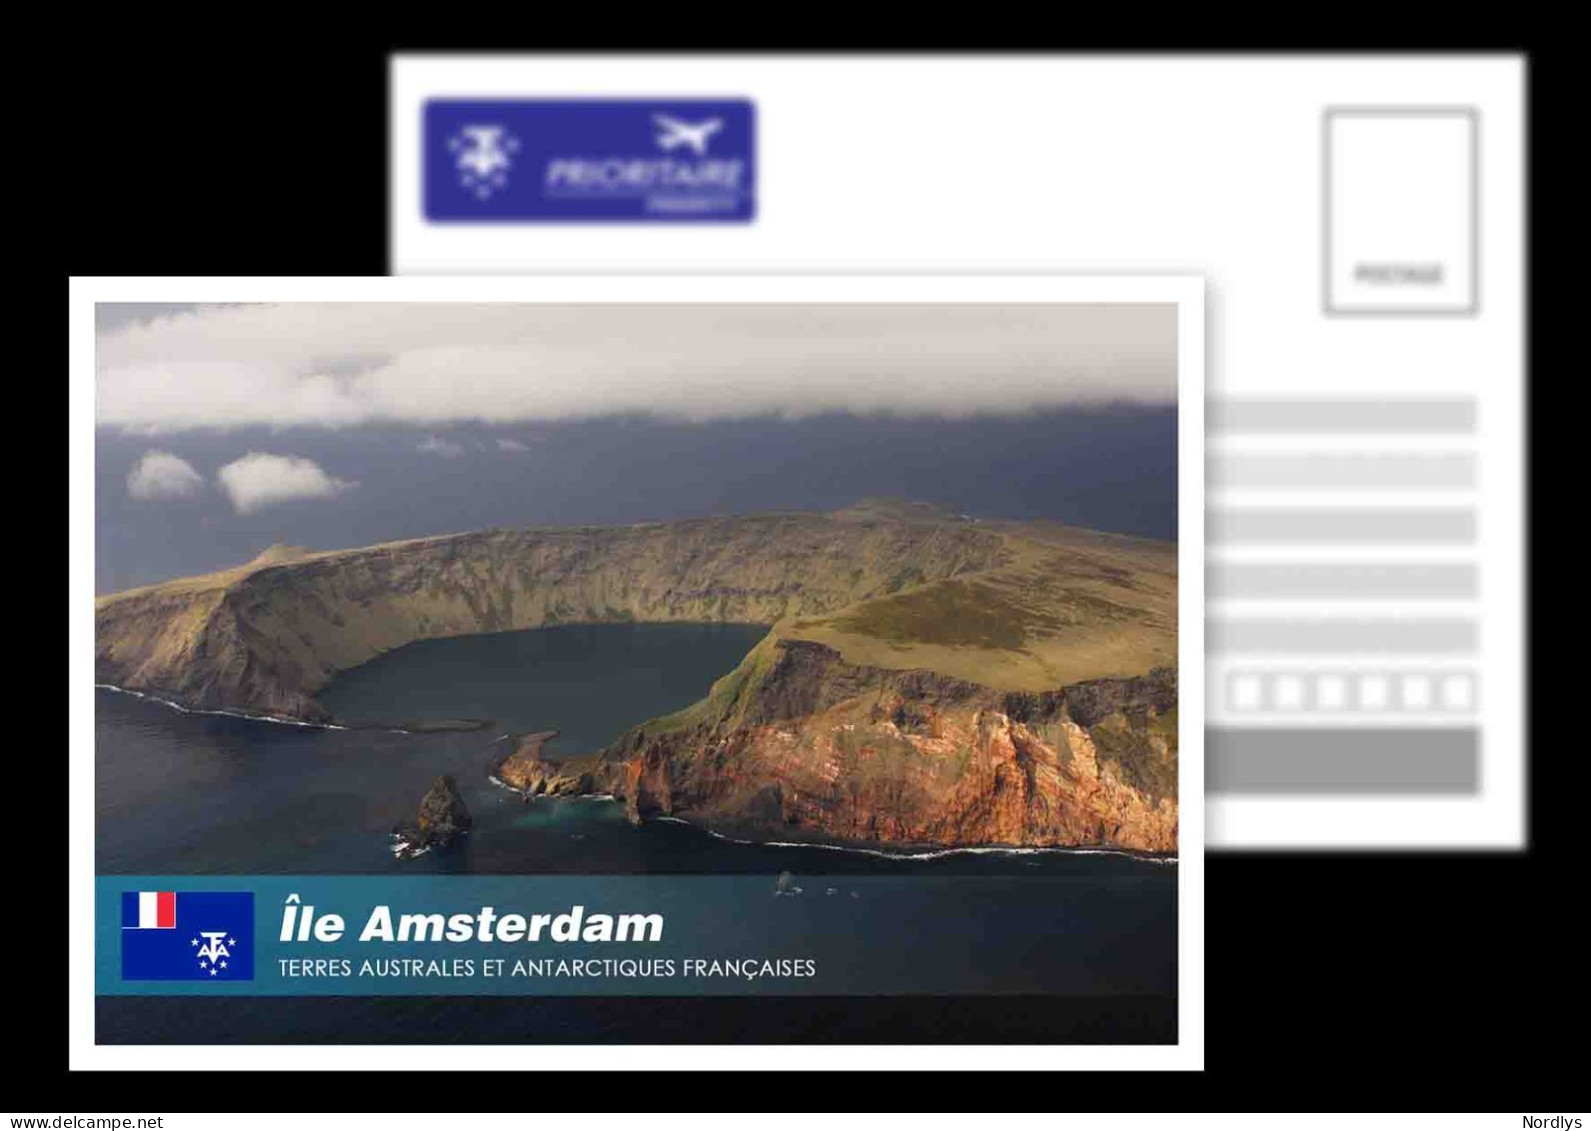 TAAF / French Antarctic Territory / Ile Amsterdam / Postcard / View Card - TAAF : Territorios Australes Franceses